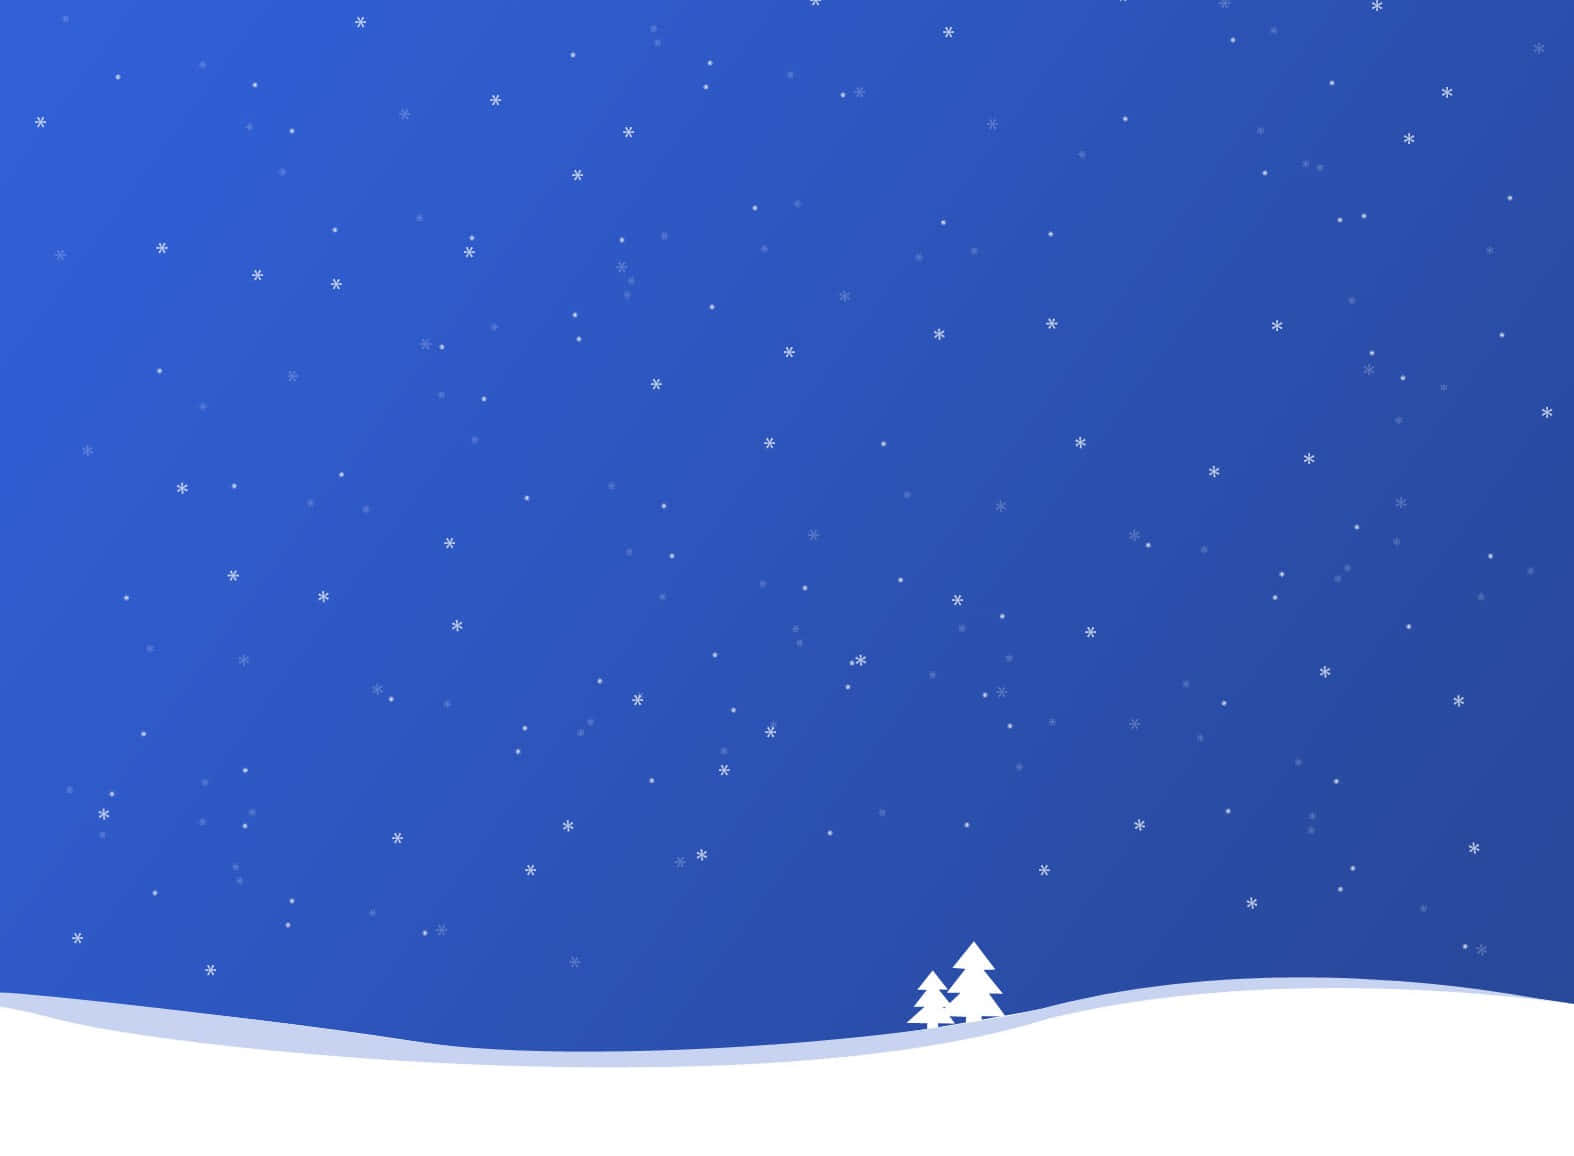 Get That Festive Christmas Vibe with This High Resolution Background